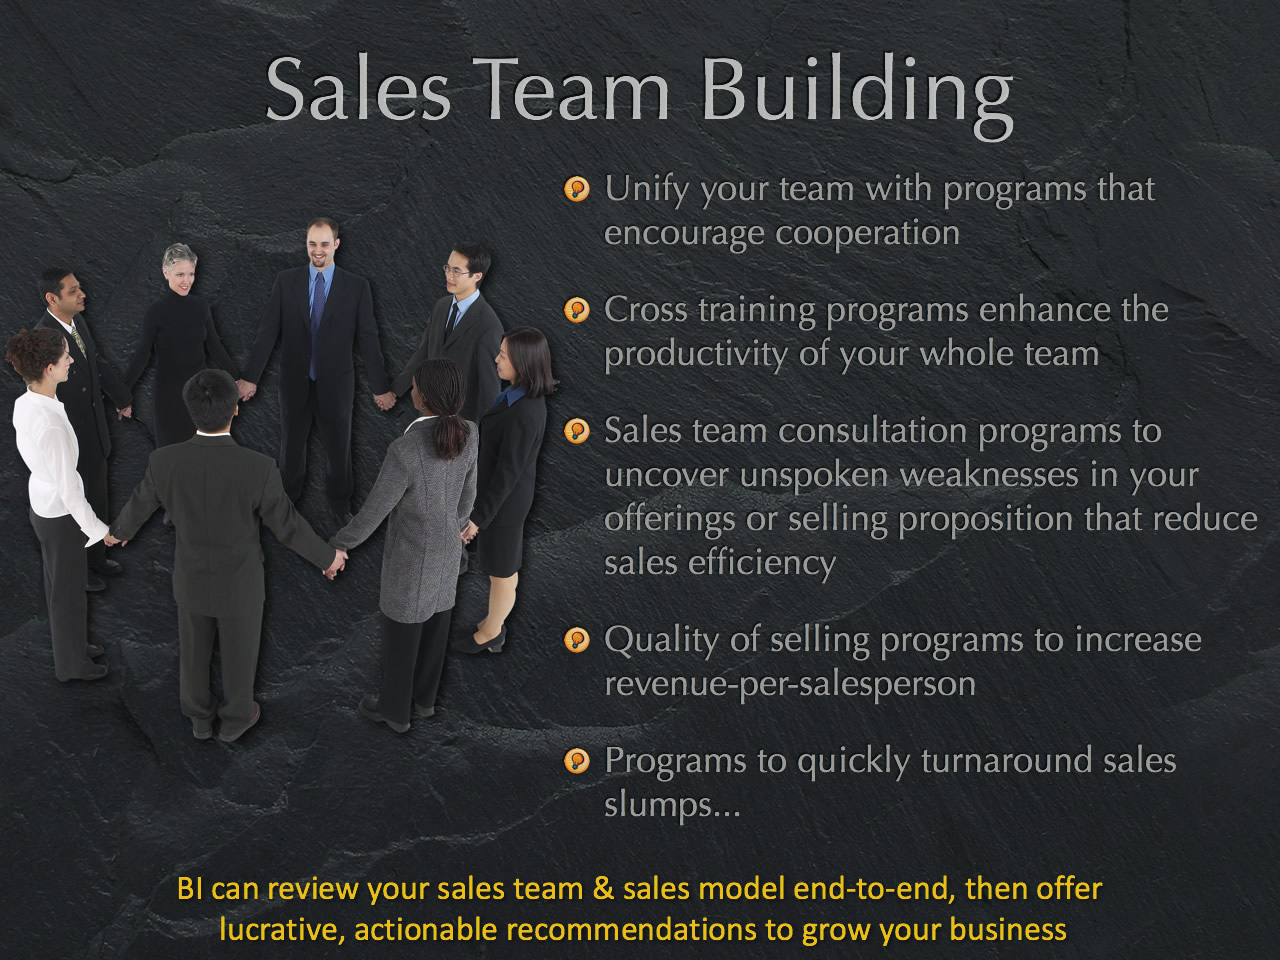 Sales team building solutions can unify the team, get important information shared and lift all boats to greater success